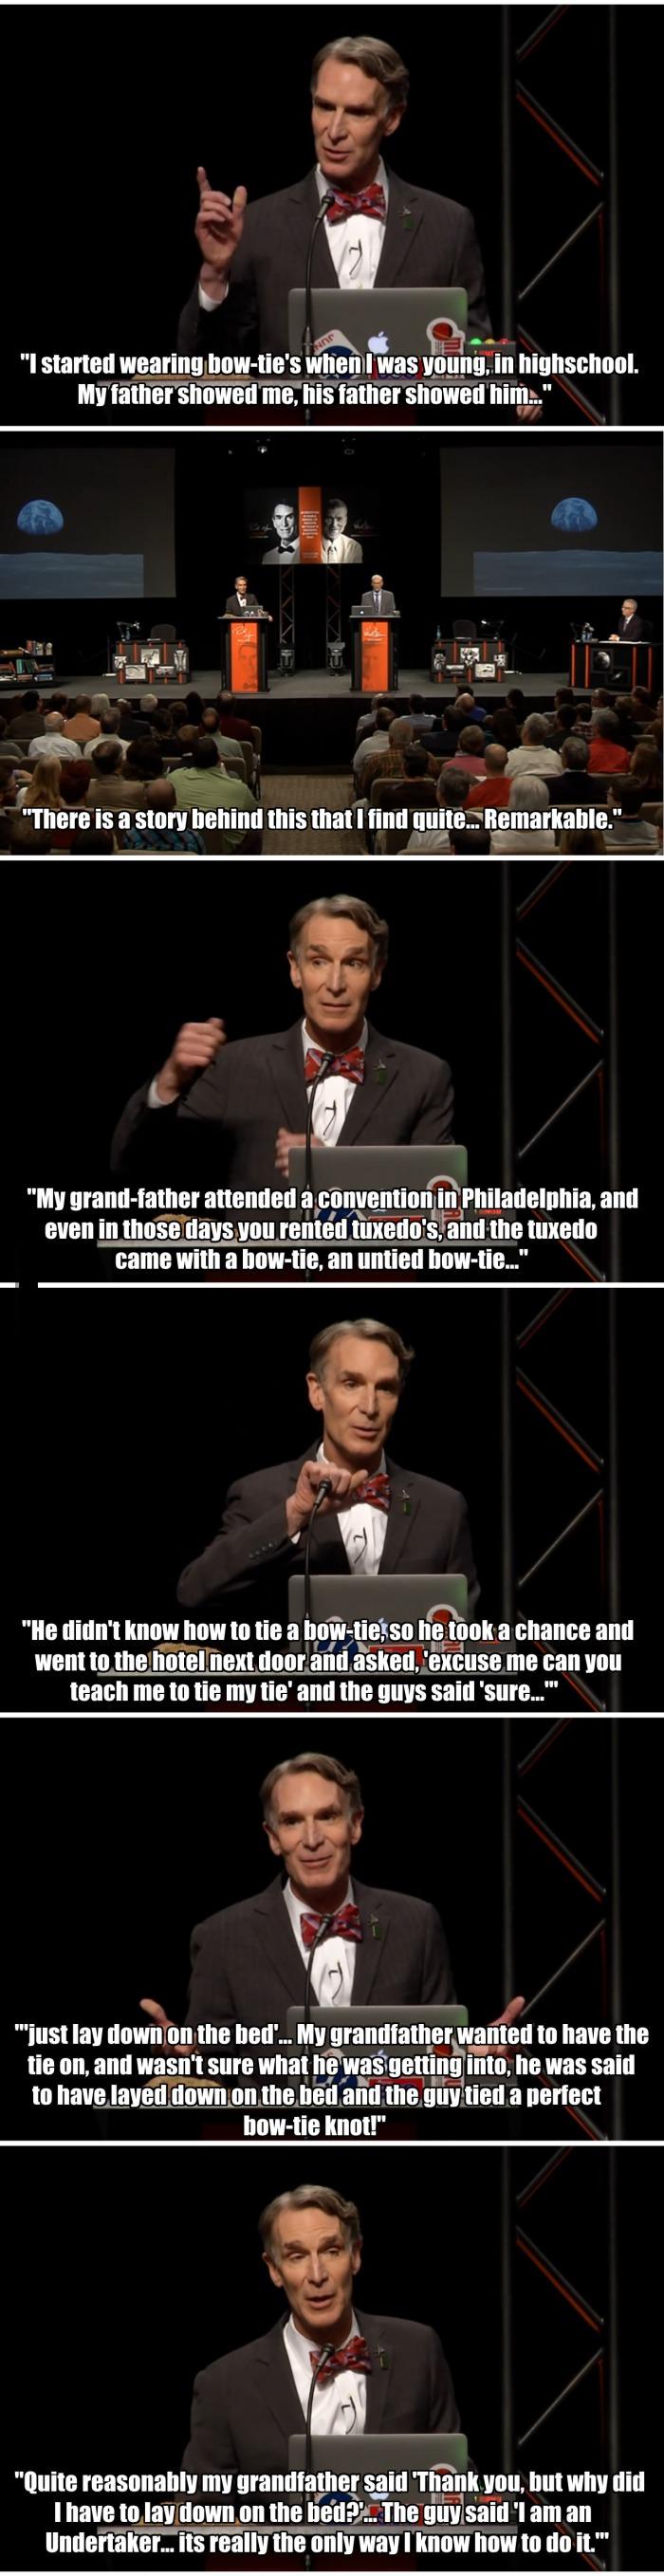 The story behind Bill Nye's bow tie